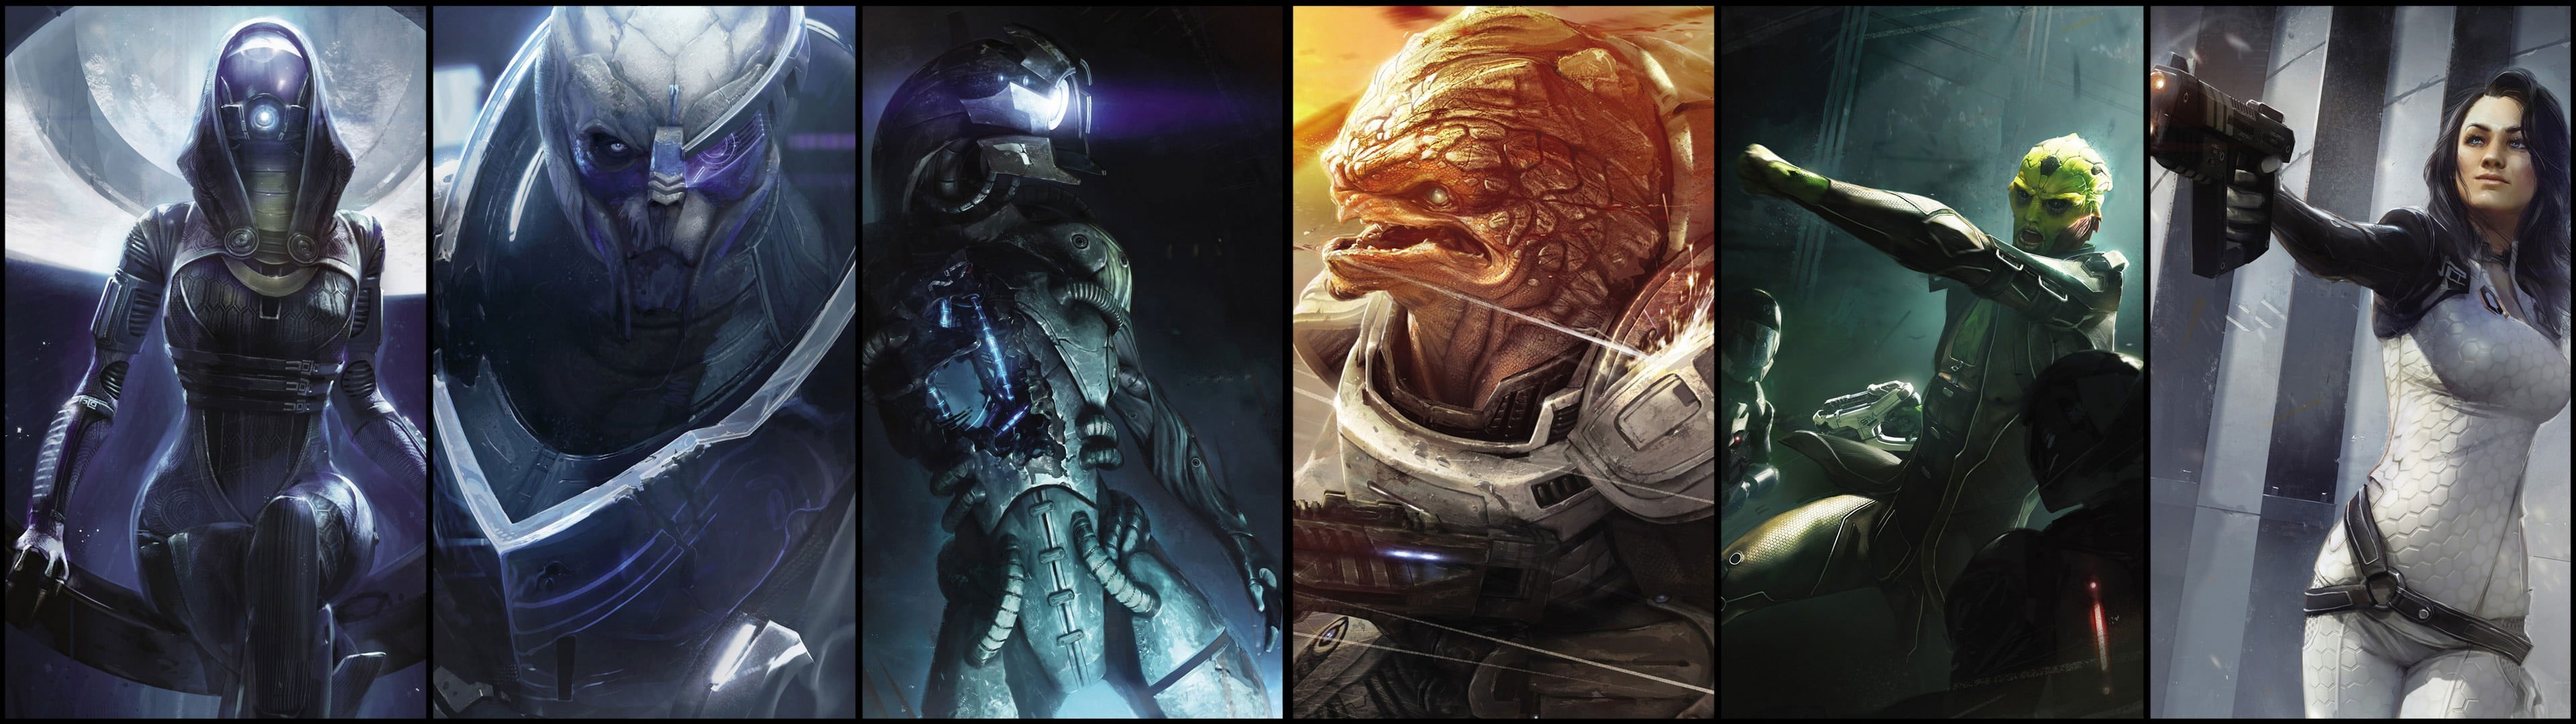 Wallpaper Game Characters Collage, Mass Effect